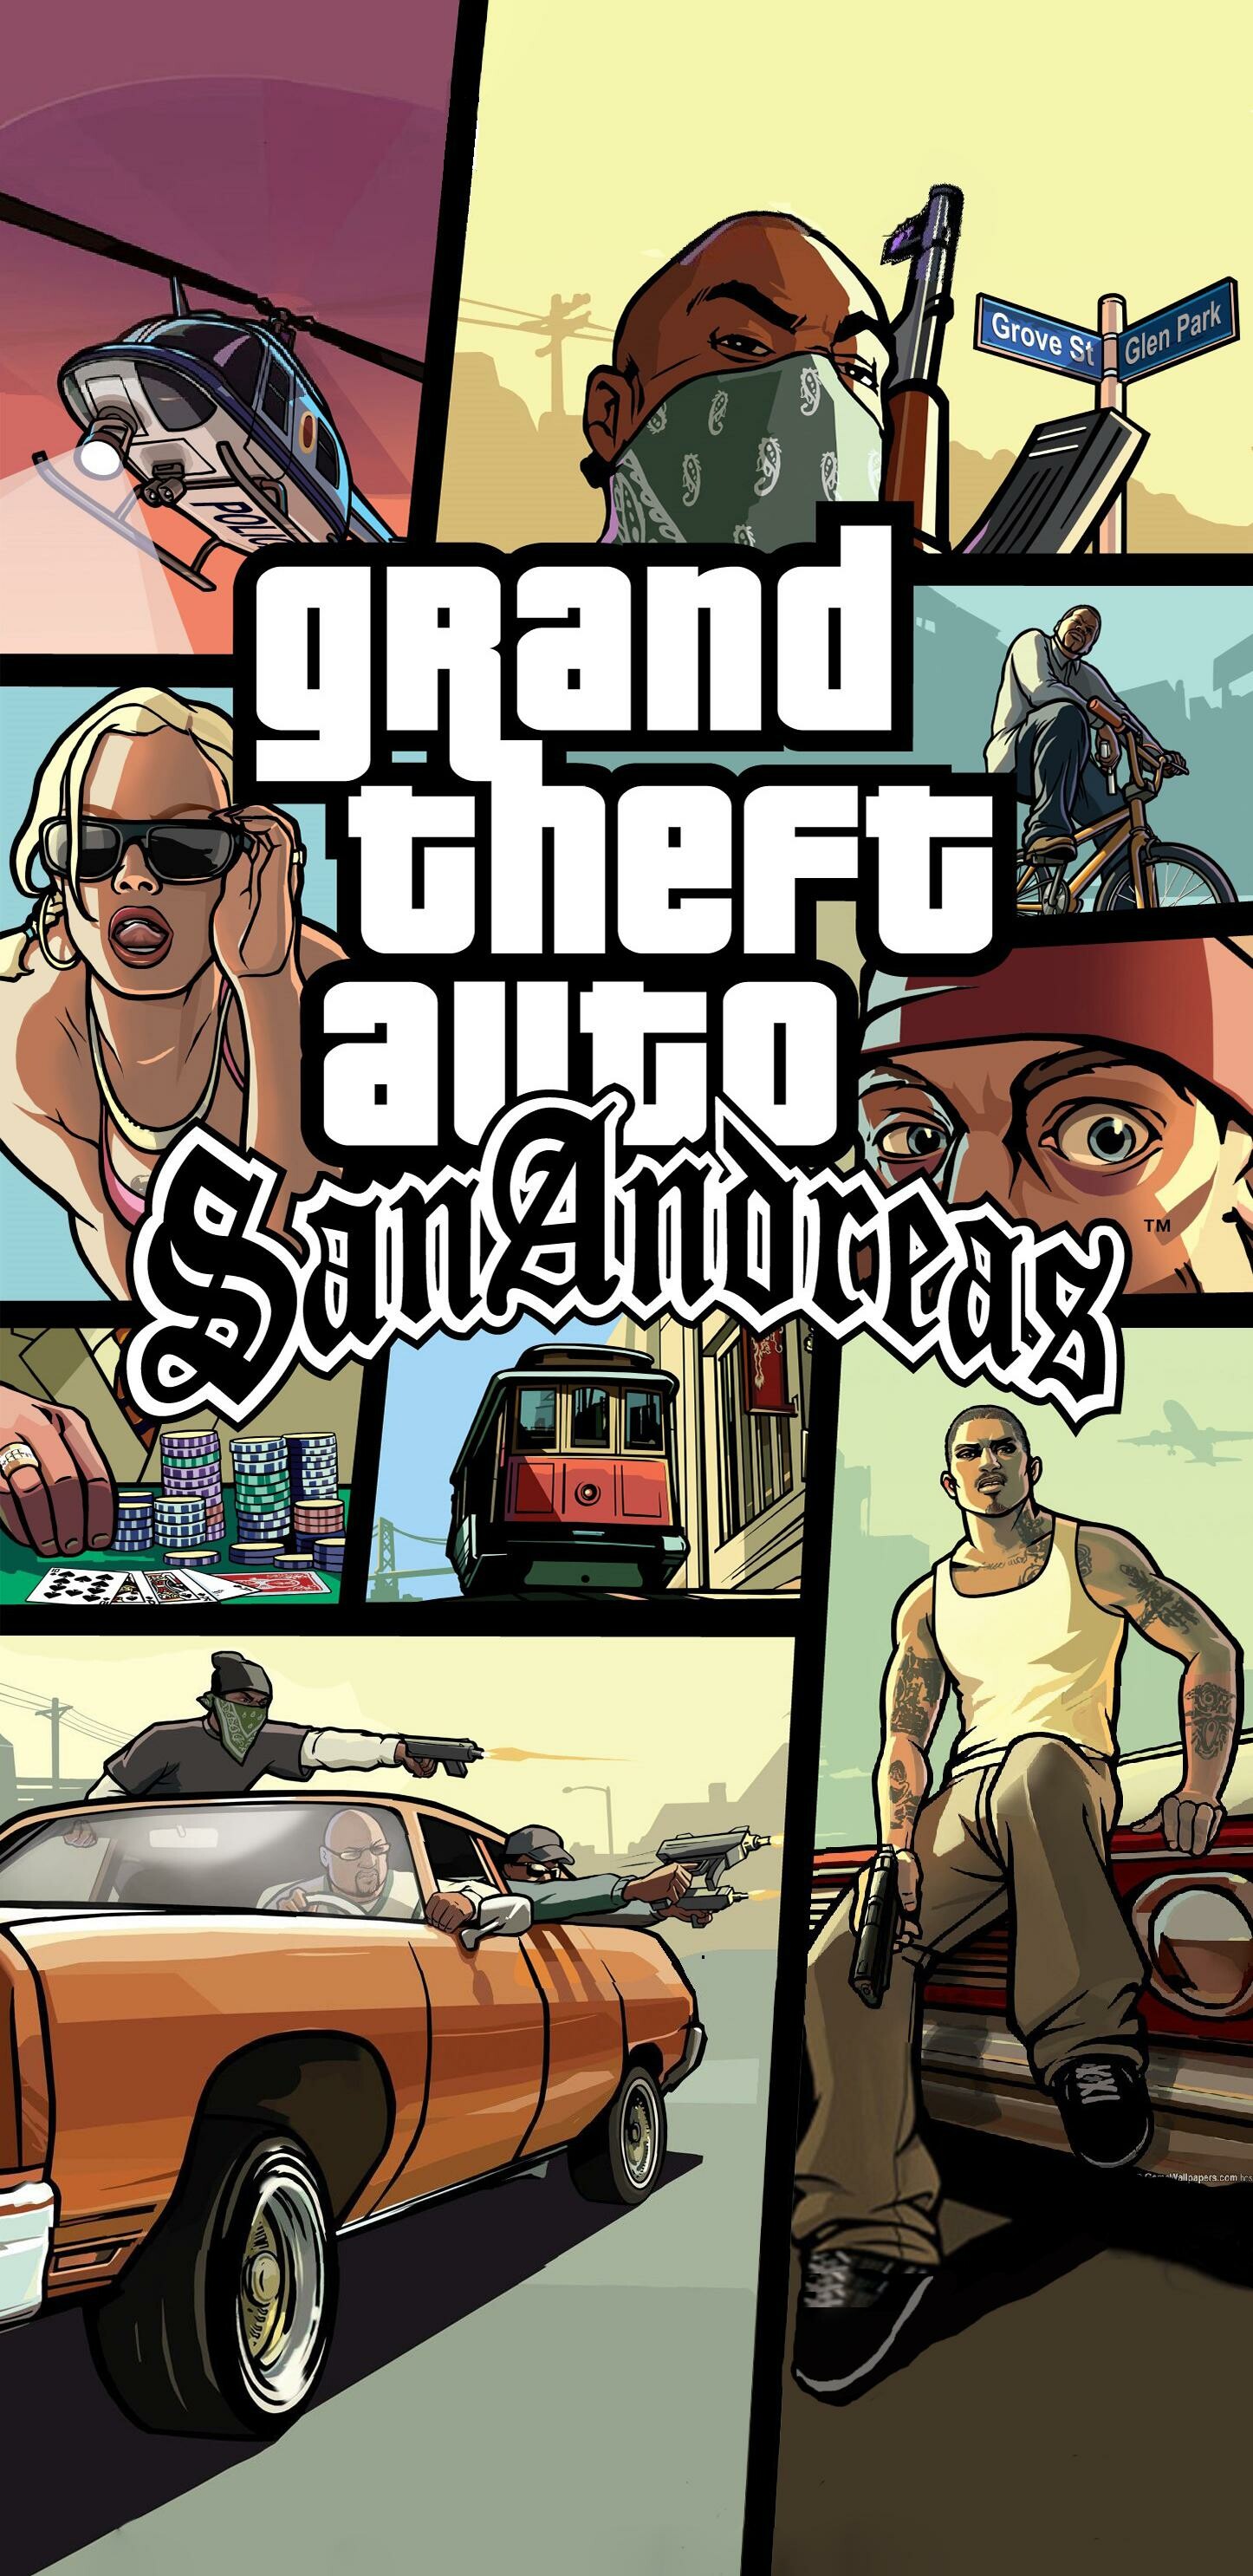 Grand Theft Auto: San Andreas: A game with role-playing elements developed by Rockstar North and published by Rockstar Games. 1450x2980 HD Wallpaper.